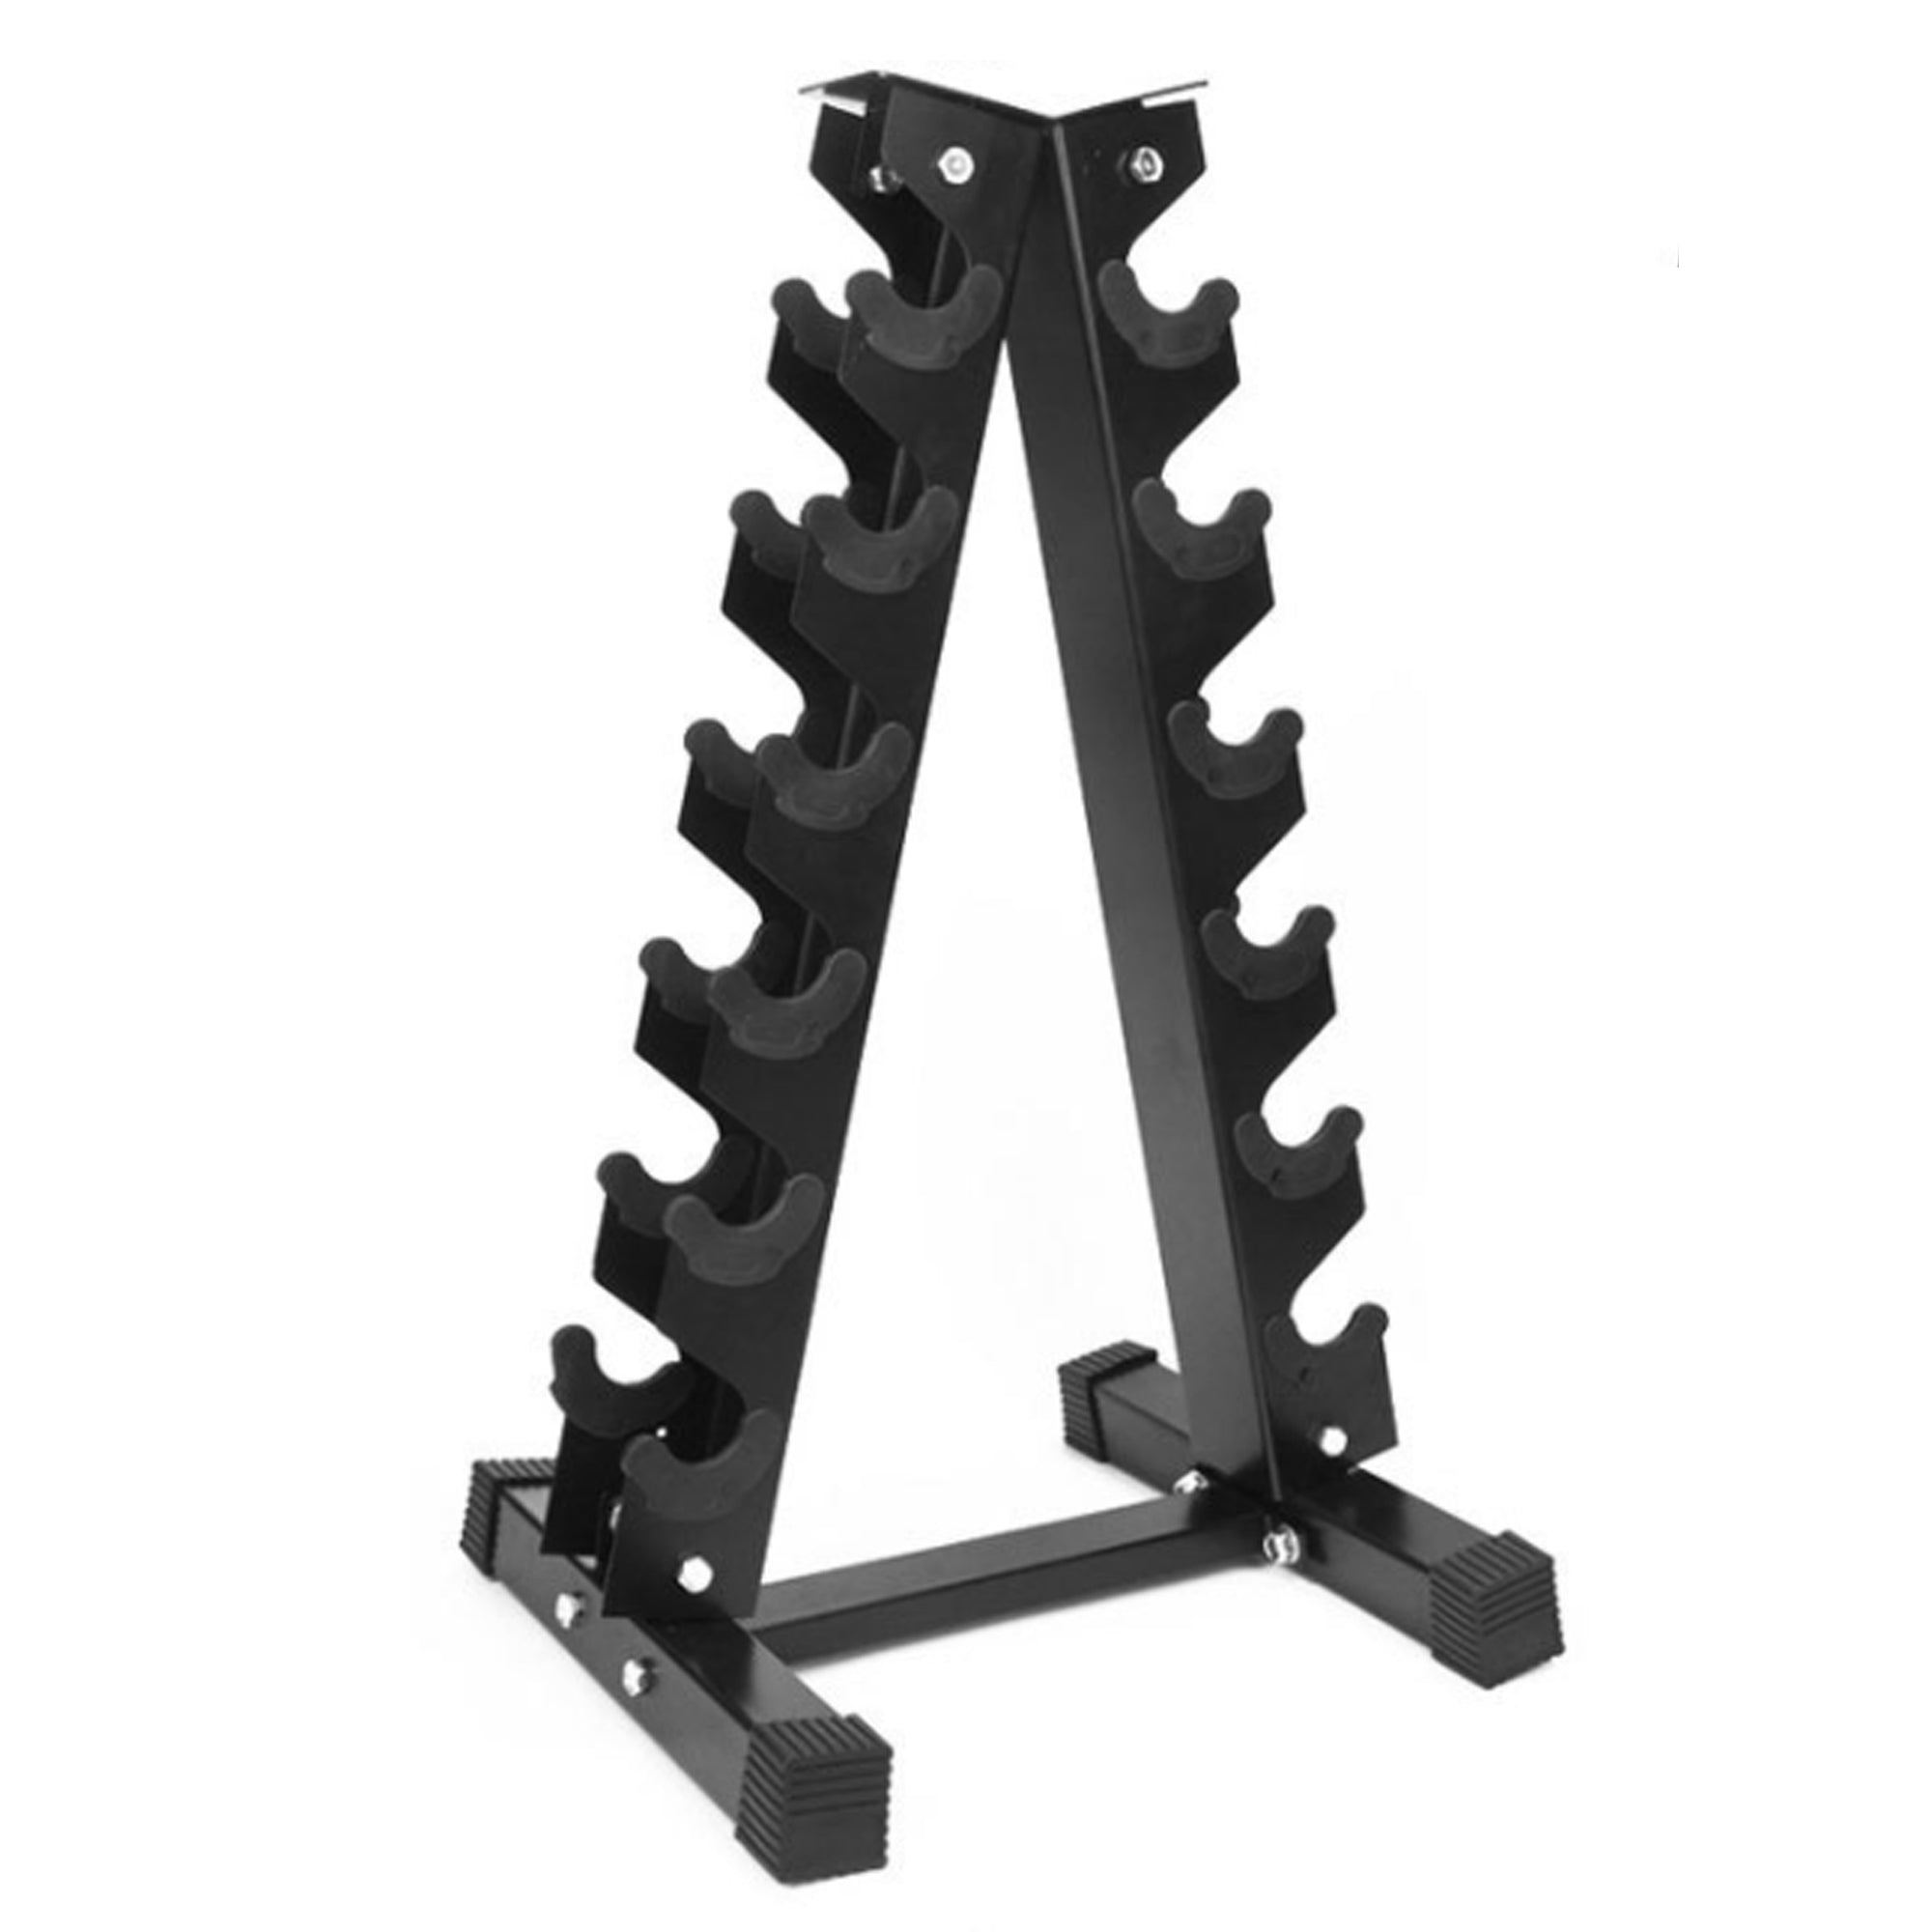 A Frame Dumbbell Rack Stand 6 Tier